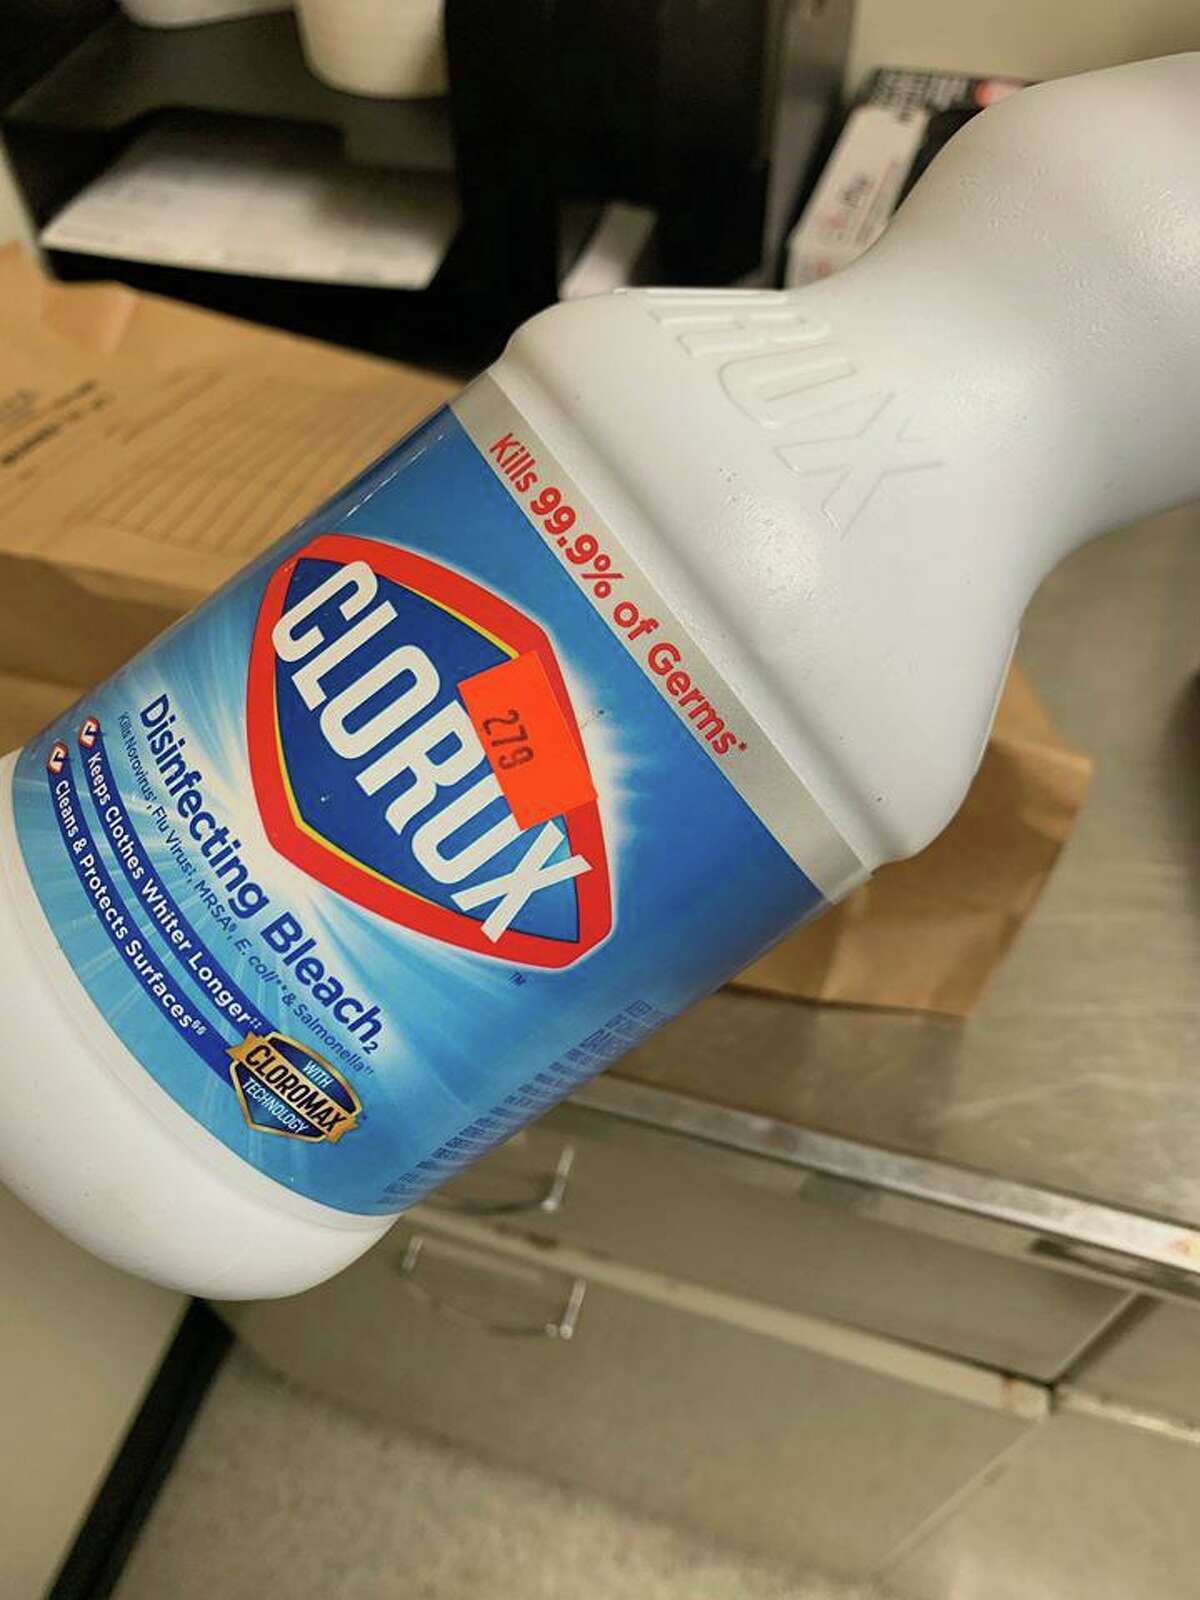 The bottle of Clorox bleach, shared by police.